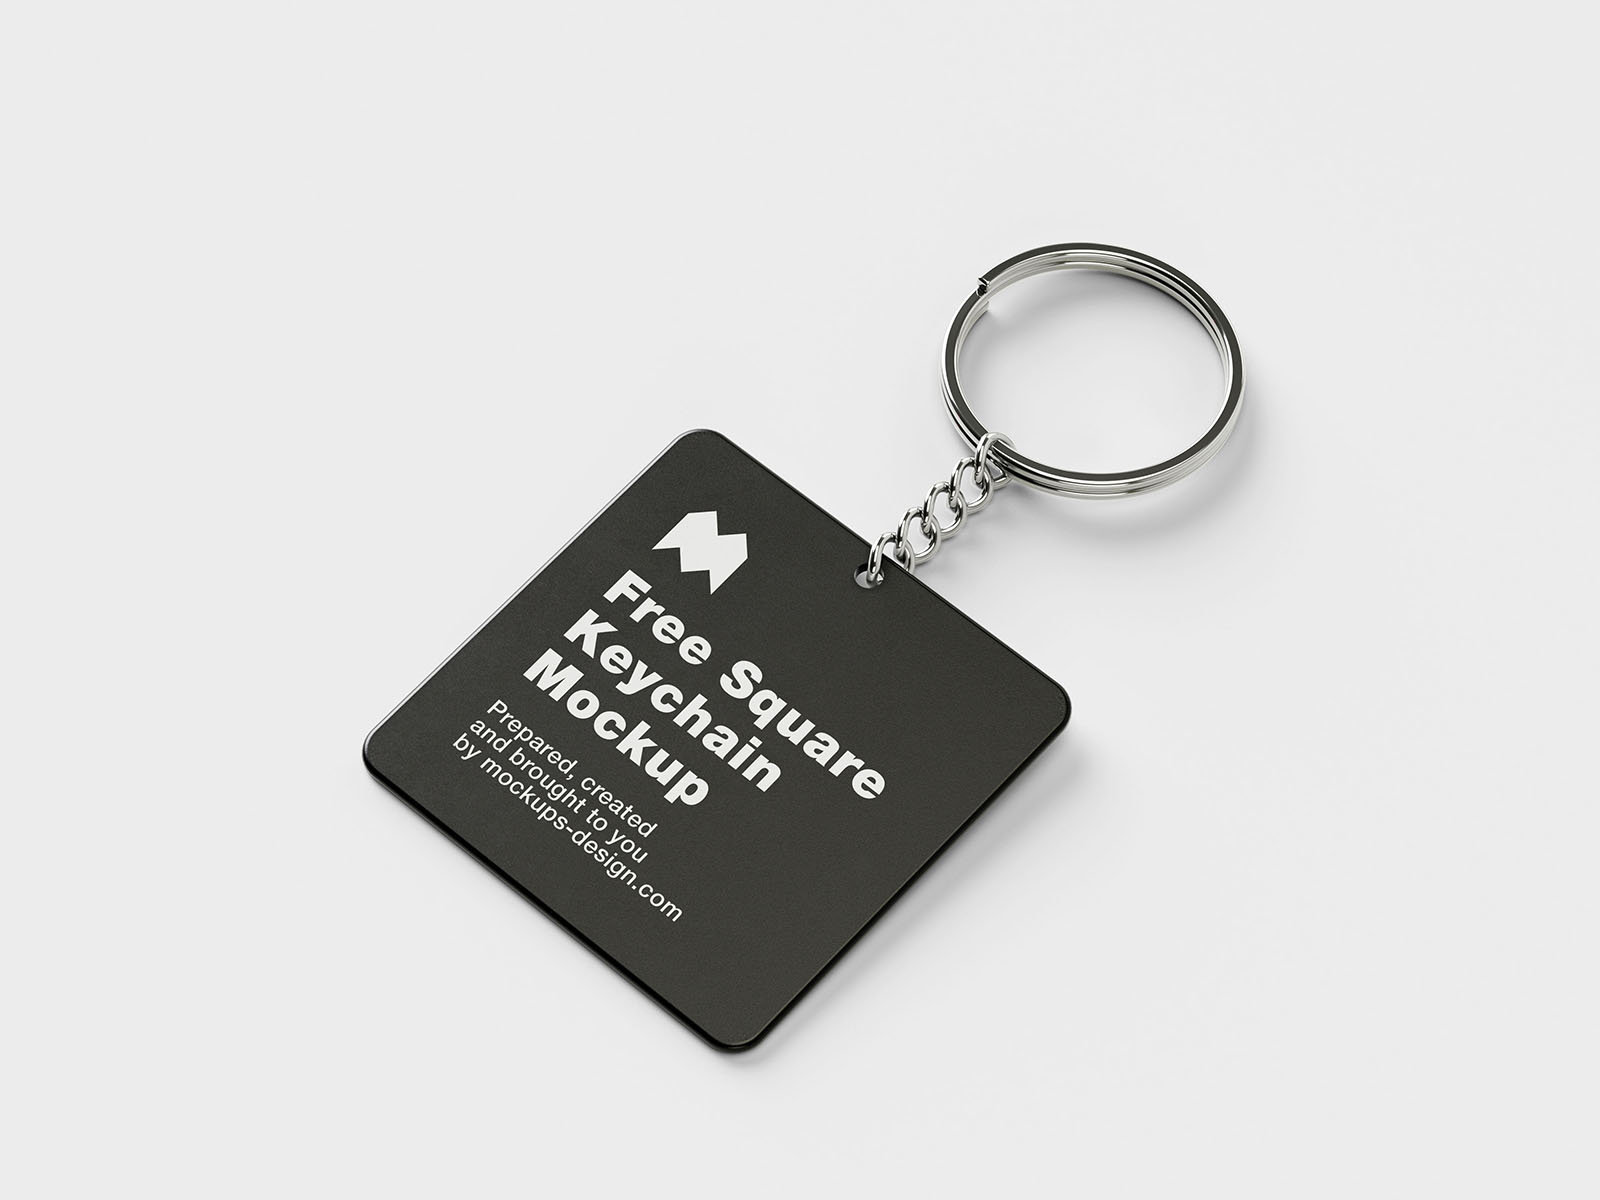 4 Mockups of Square Key Chain FREE PSD